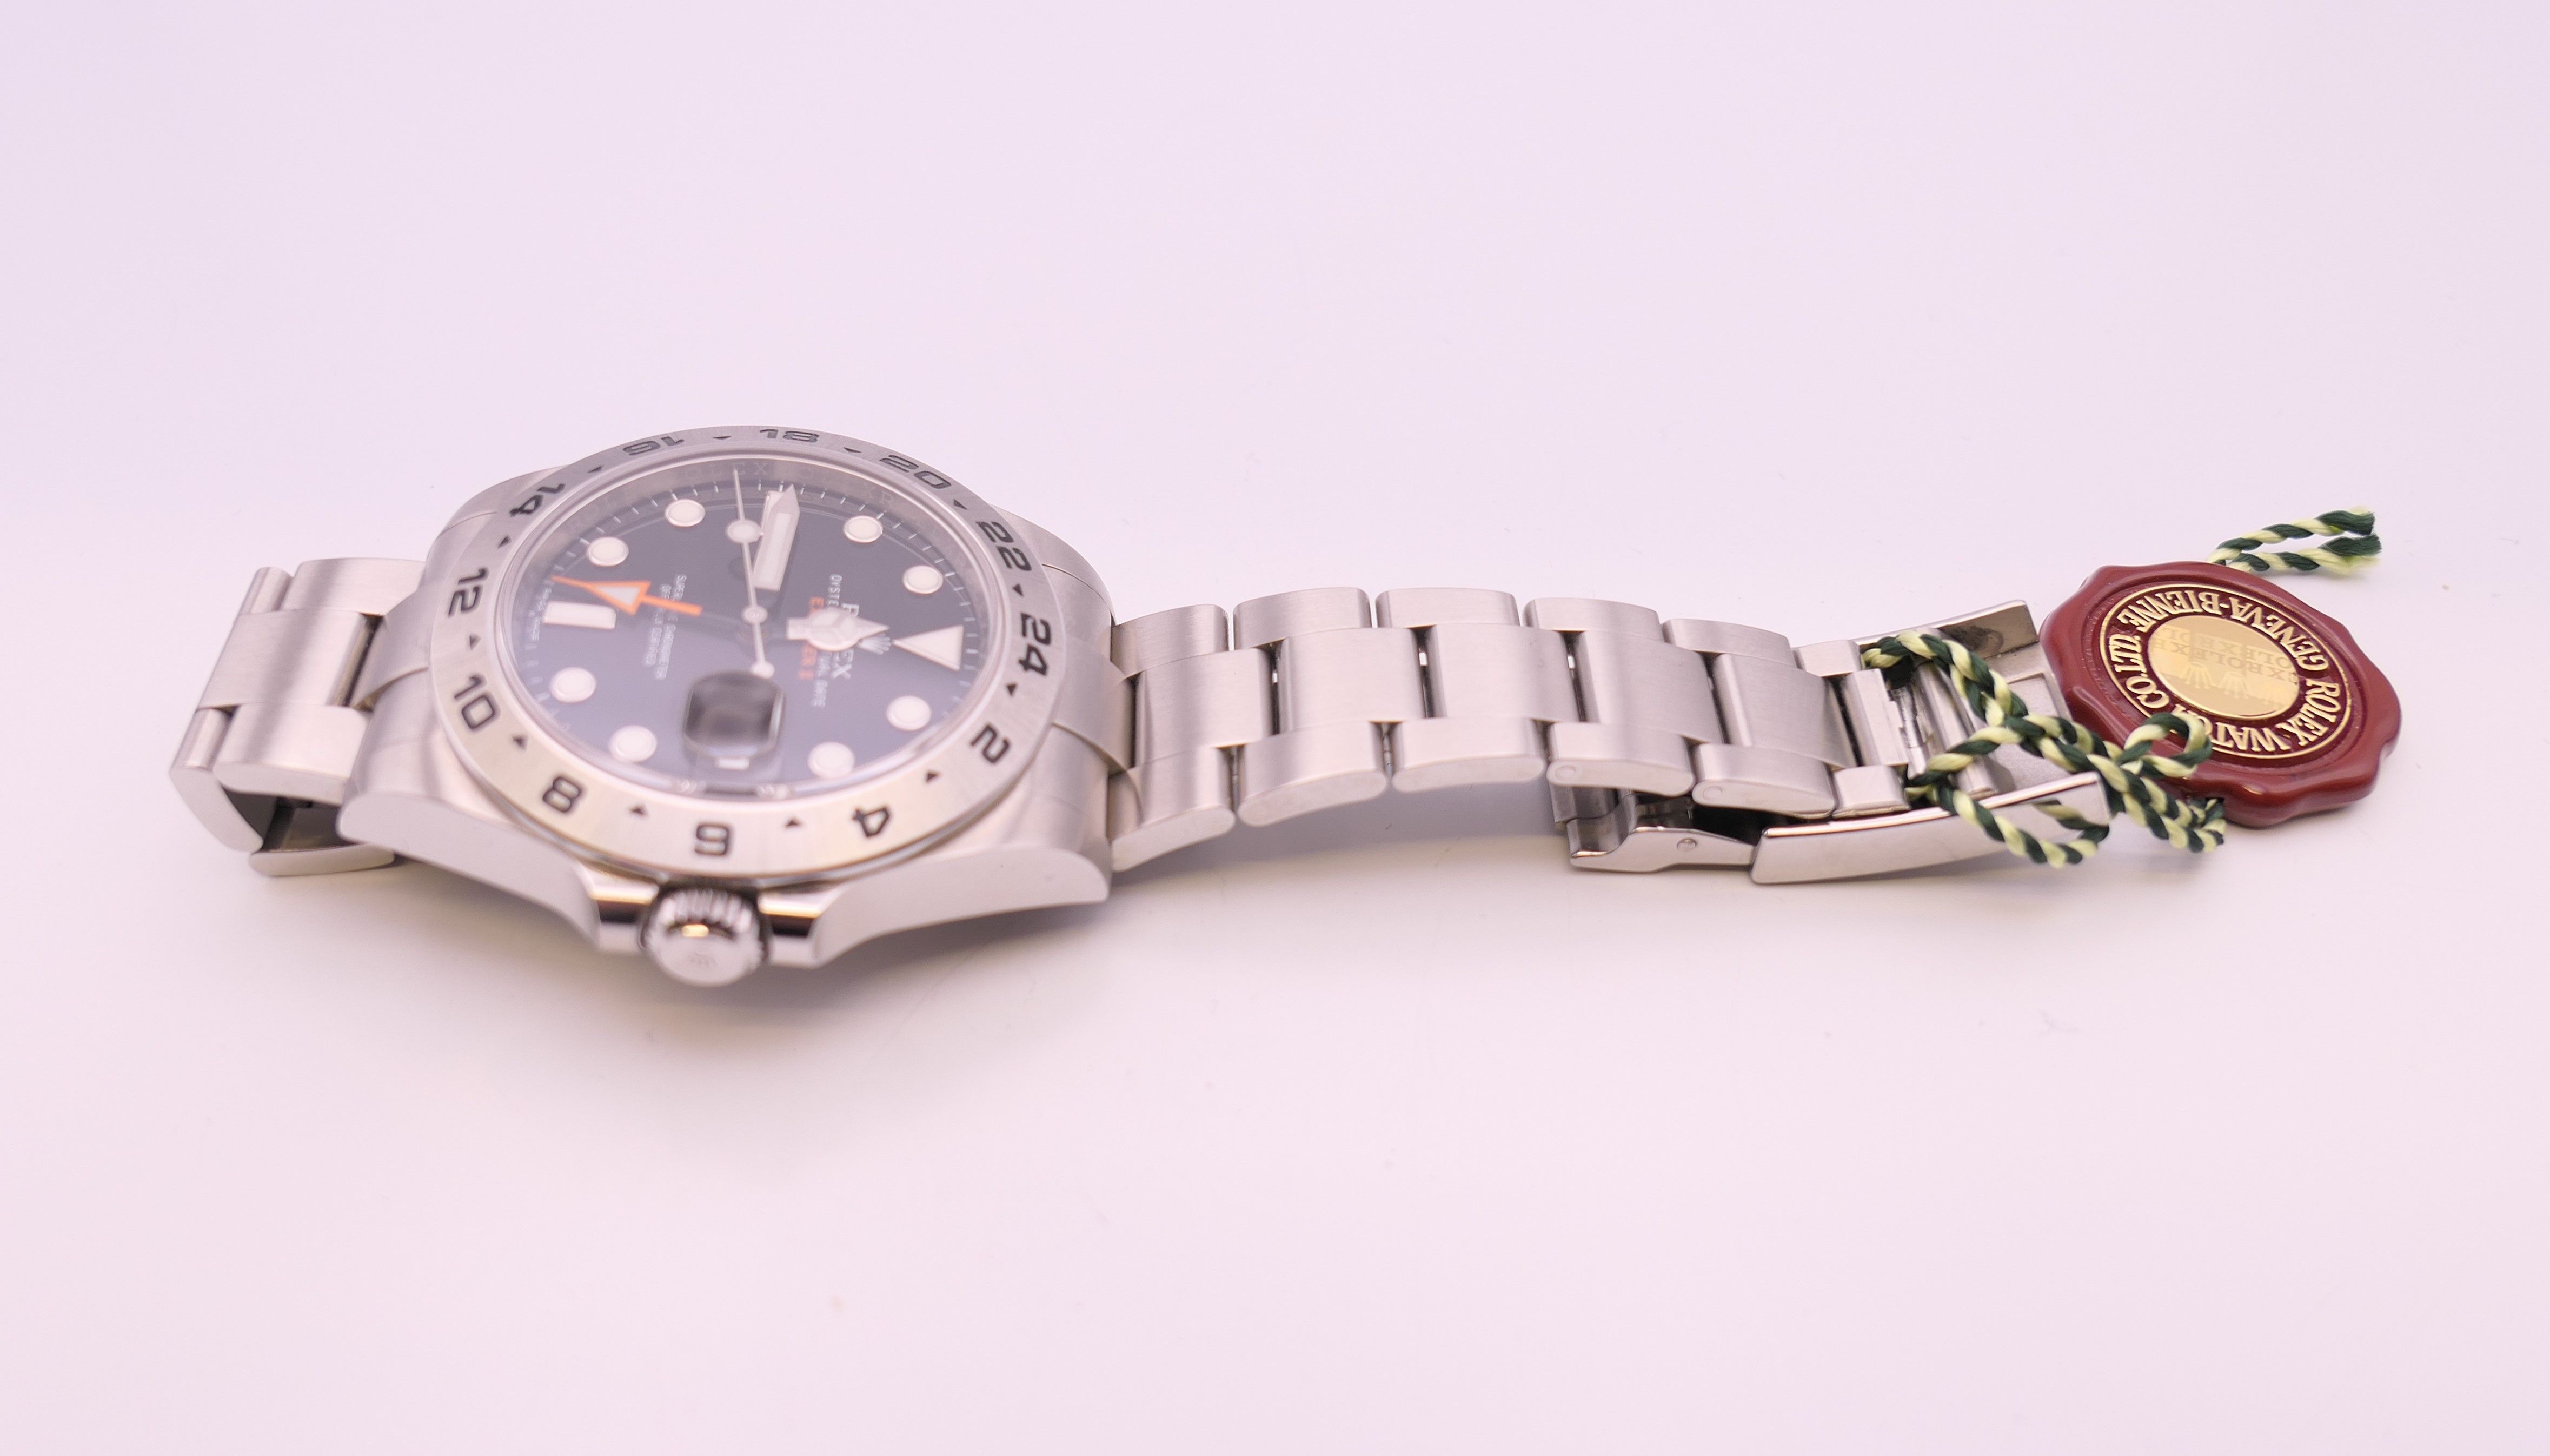 A Rolex Perpetual Date Explorer II watch with black dial, model number 216570, - Image 3 of 13